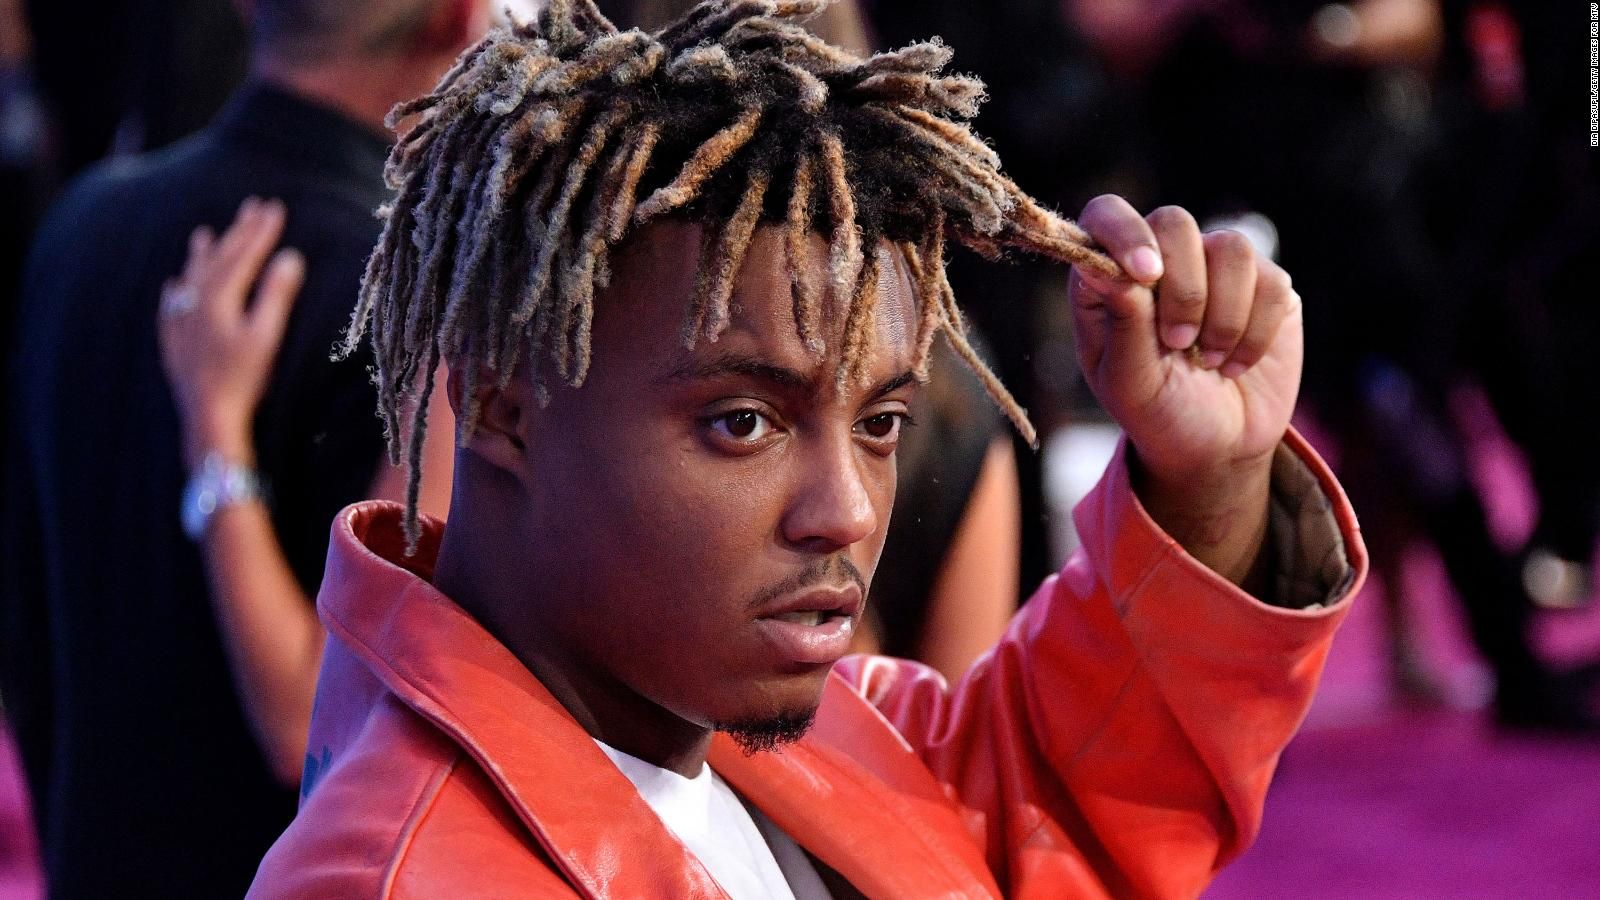 Remembering the legacy of Juice WRLD